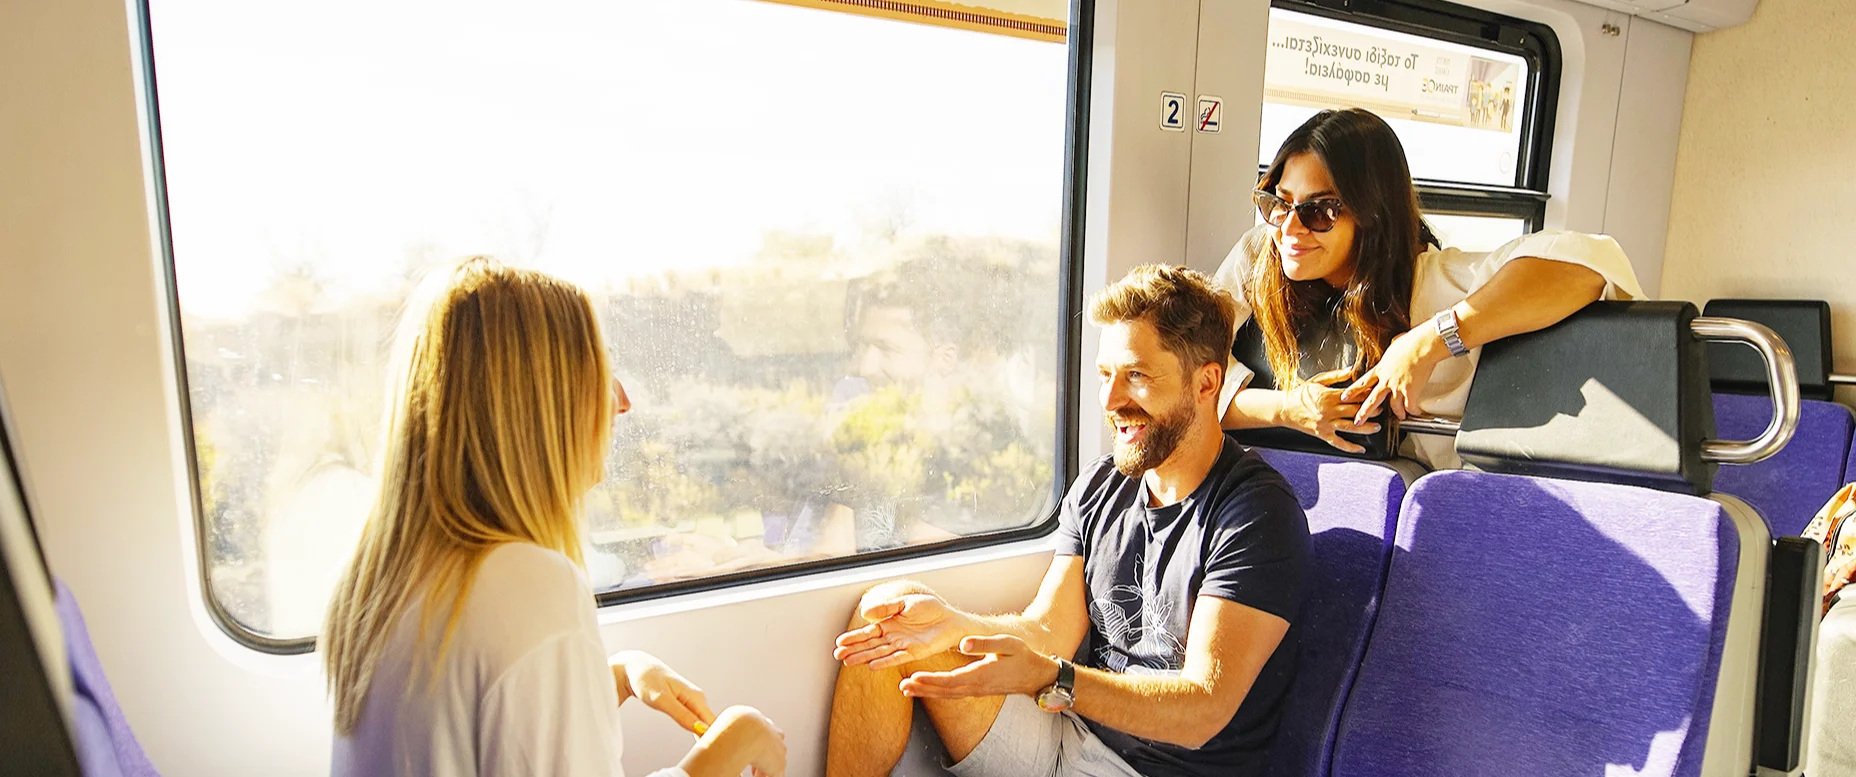 Two women and a man chat onboard a train in Europe, from the window you can see blue skies and scenery on a hot day